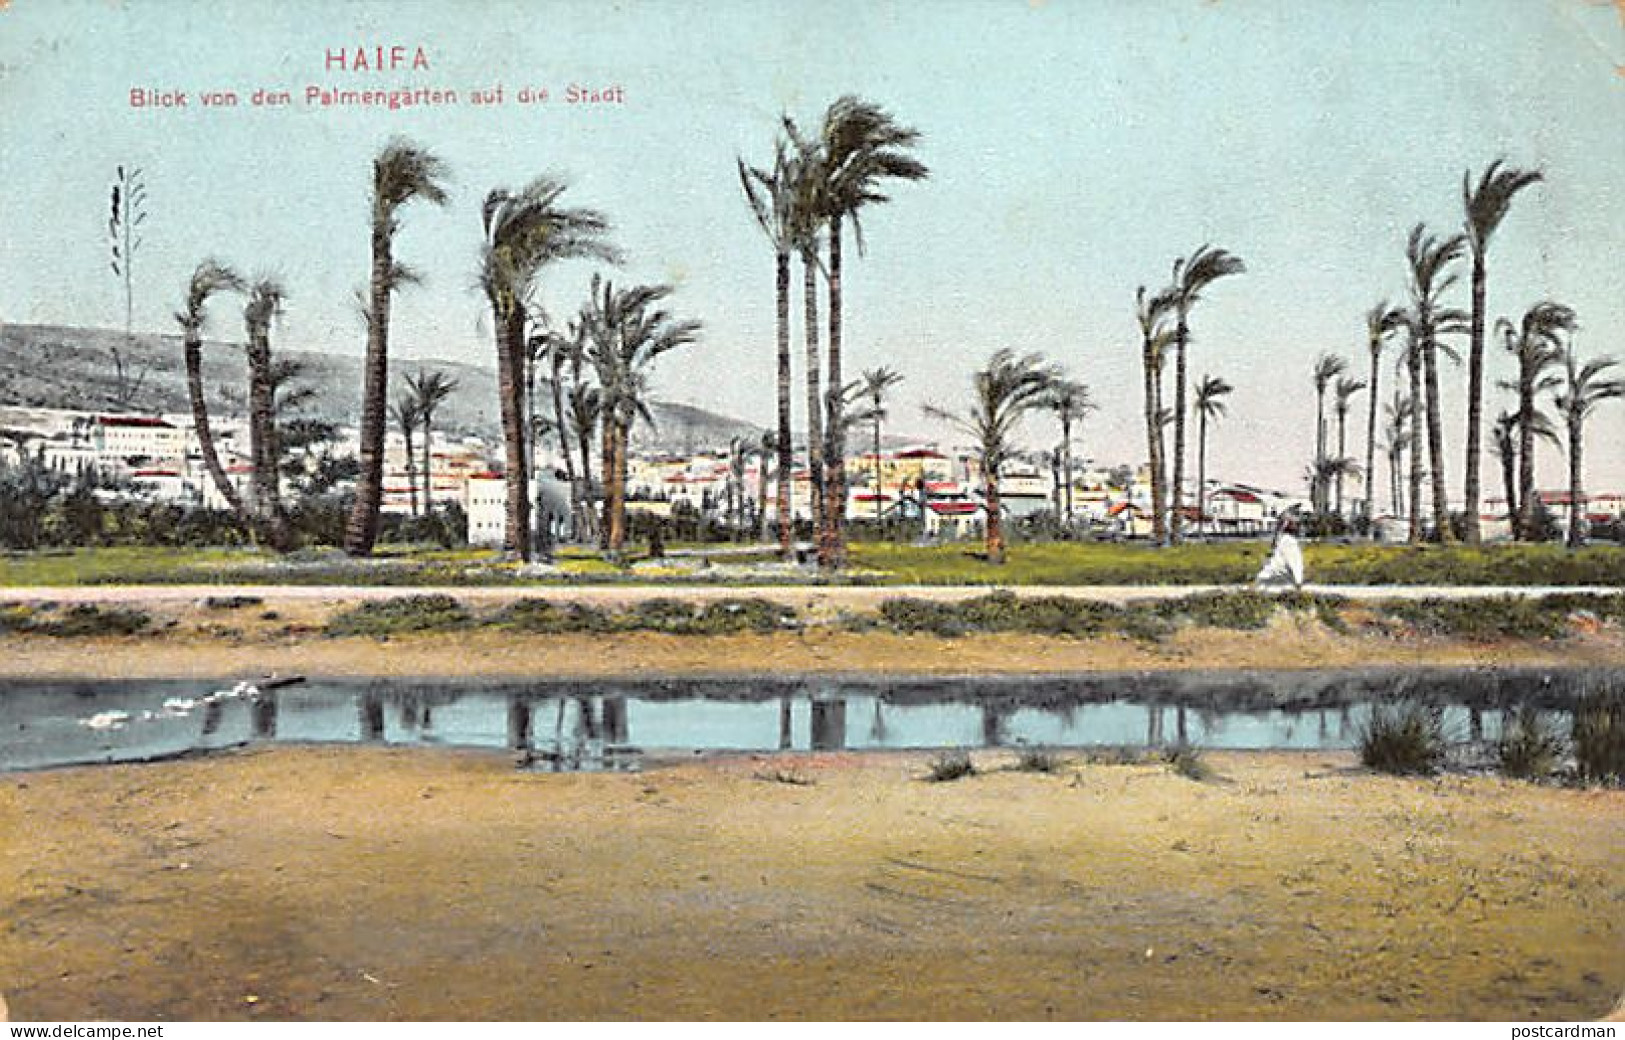 Israel - HAIFA - View Of The City From The Palm Gardens - Publ. Struve & Beck 76844 - Israel